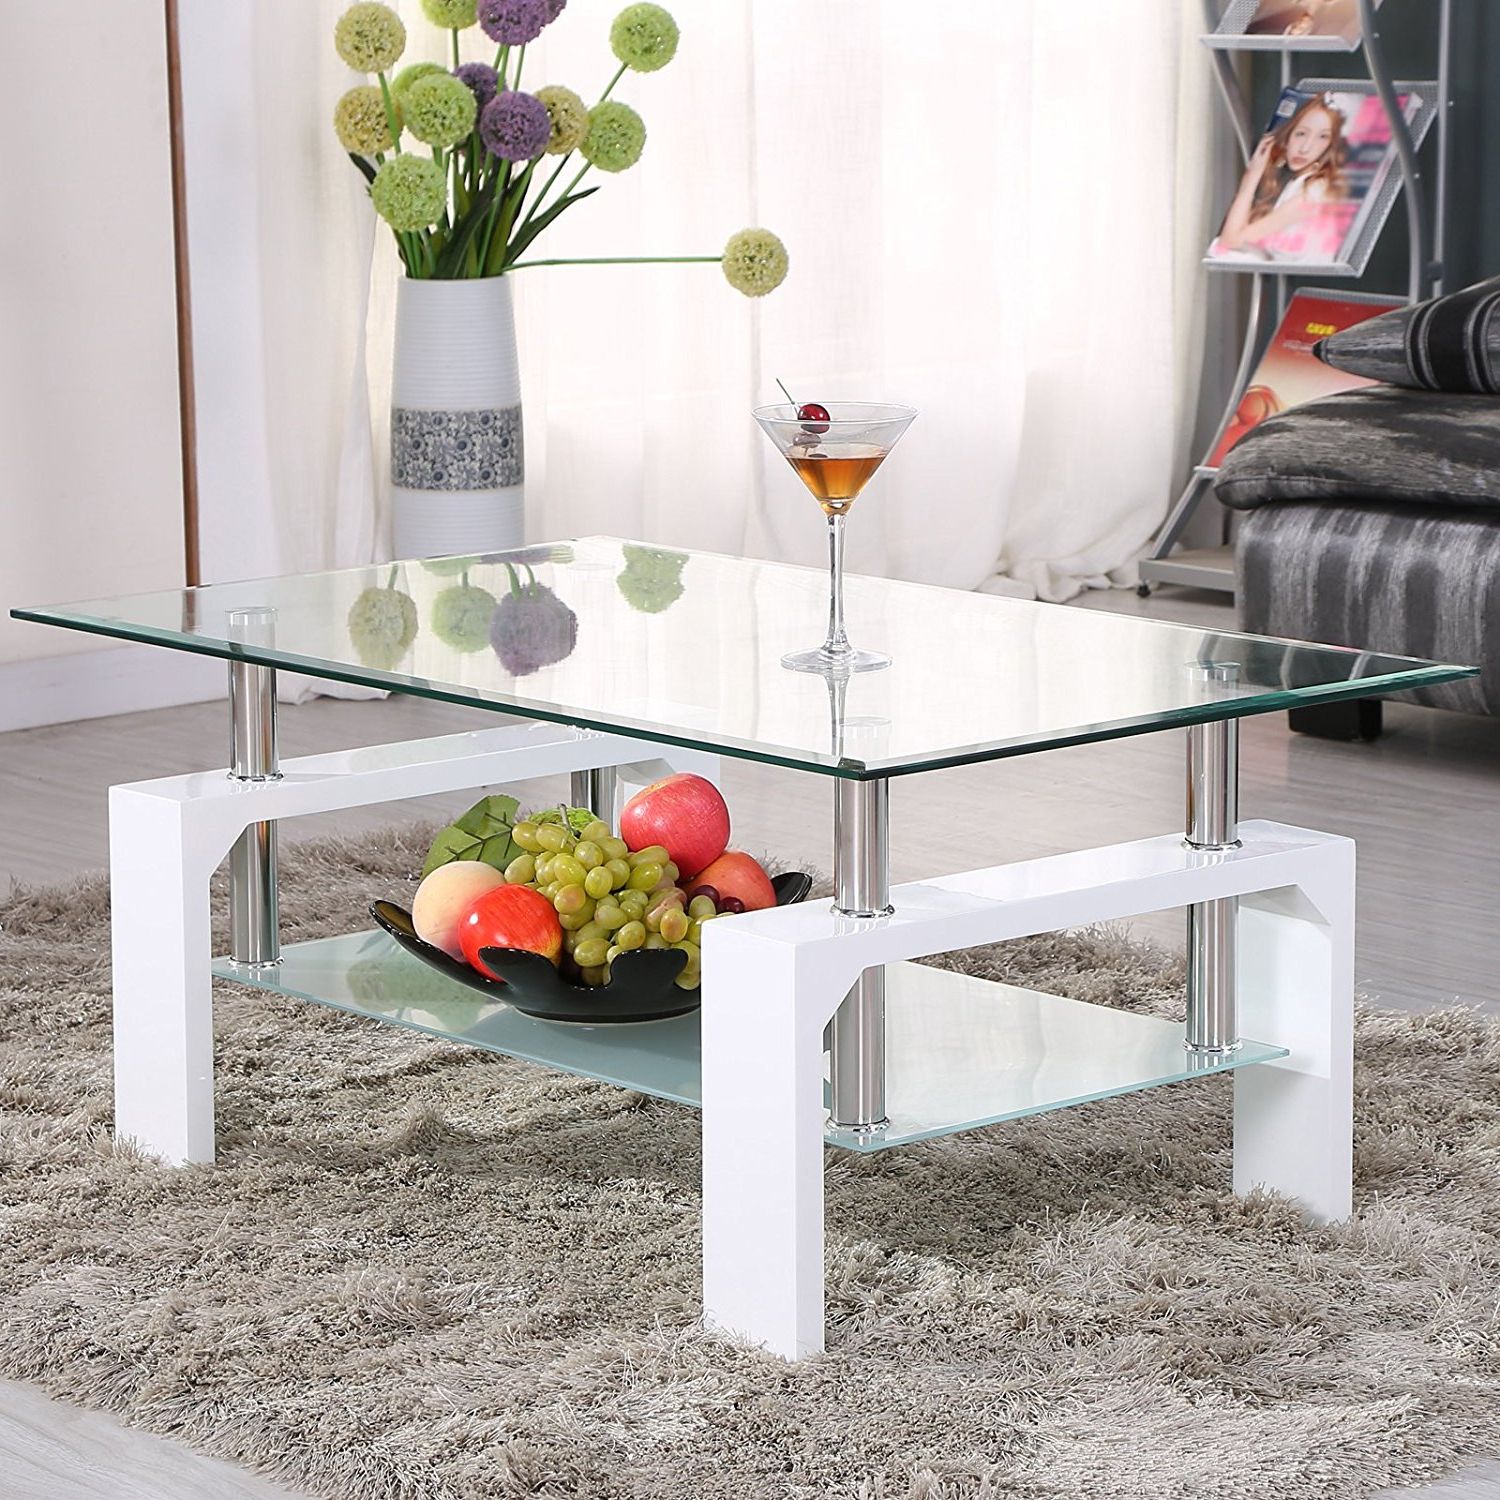 Popular Chrome And Glass Modern Coffee Tables With Uenjoy Rectangular Glass Coffee Table Shelf Chrome White Wood Living (View 10 of 10)